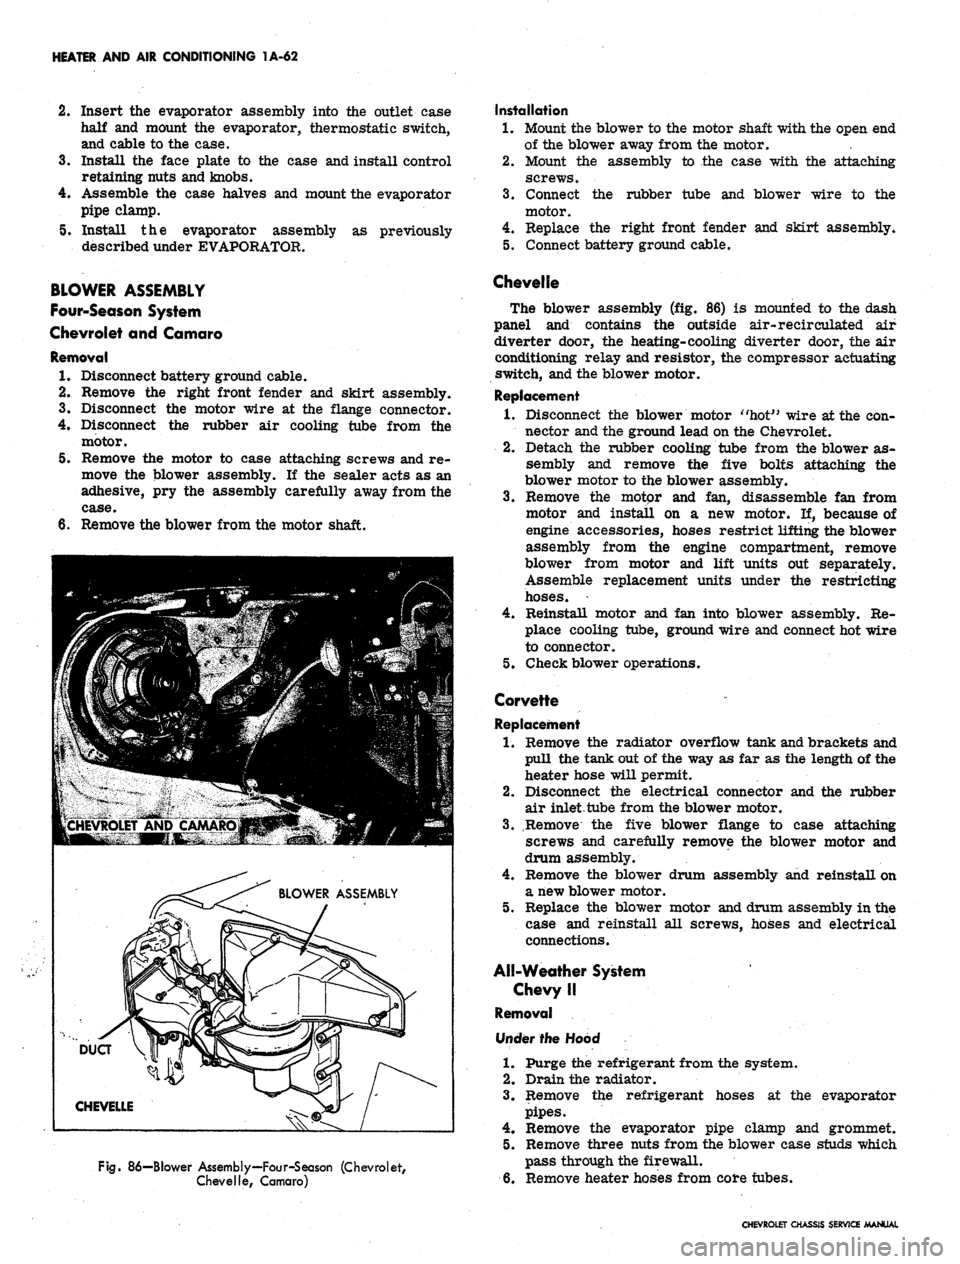 CHEVROLET CAMARO 1967 1.G Chassis Workshop Manual 
HEATER AND AIR CONDITIONING 1A-62

2.
 Insert the evaporator assembly into the outlet case

half and mount the evaporator, thermostatic switch,

and cable to the case.

3.
 Install the face plate to 